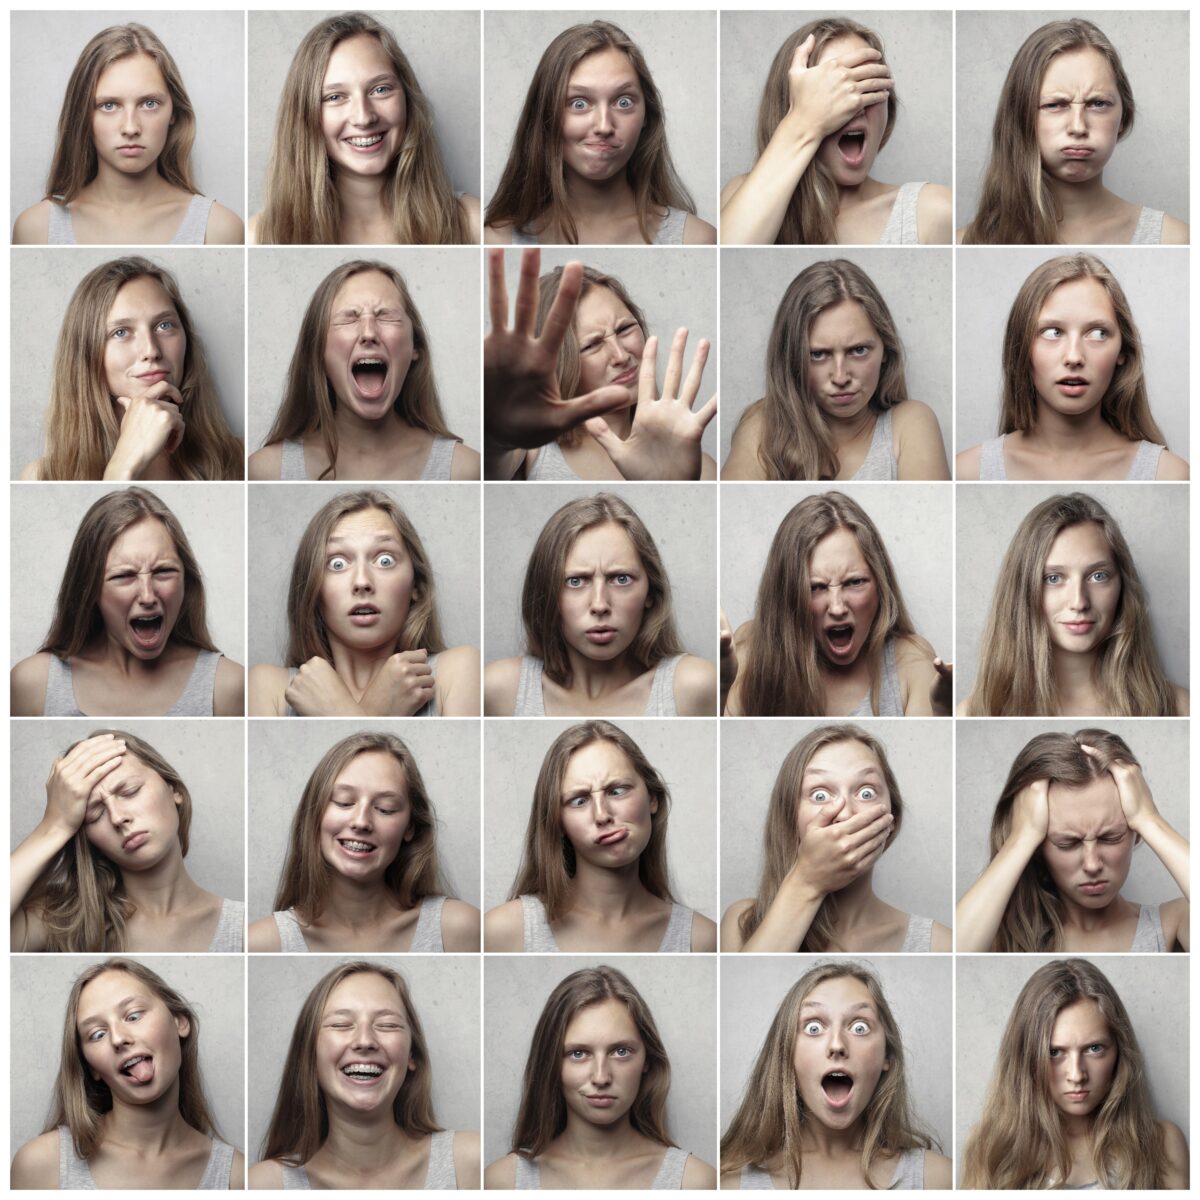 A collage of photos of the same woman with many different expressions.